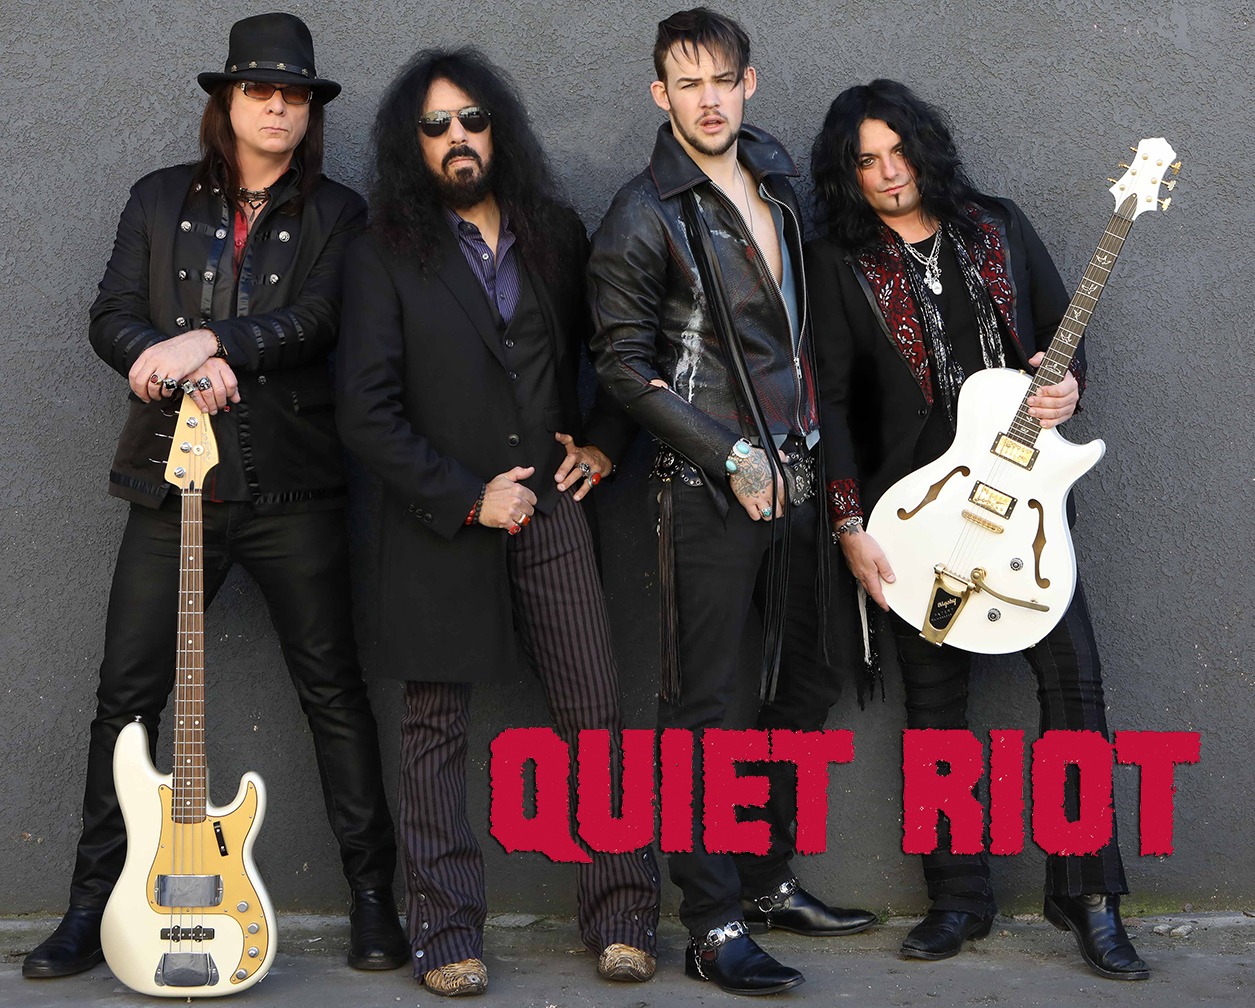 QUIET RIOT To Re-Record New Album "Road Rage" With New Lead Vocalist James Durbin